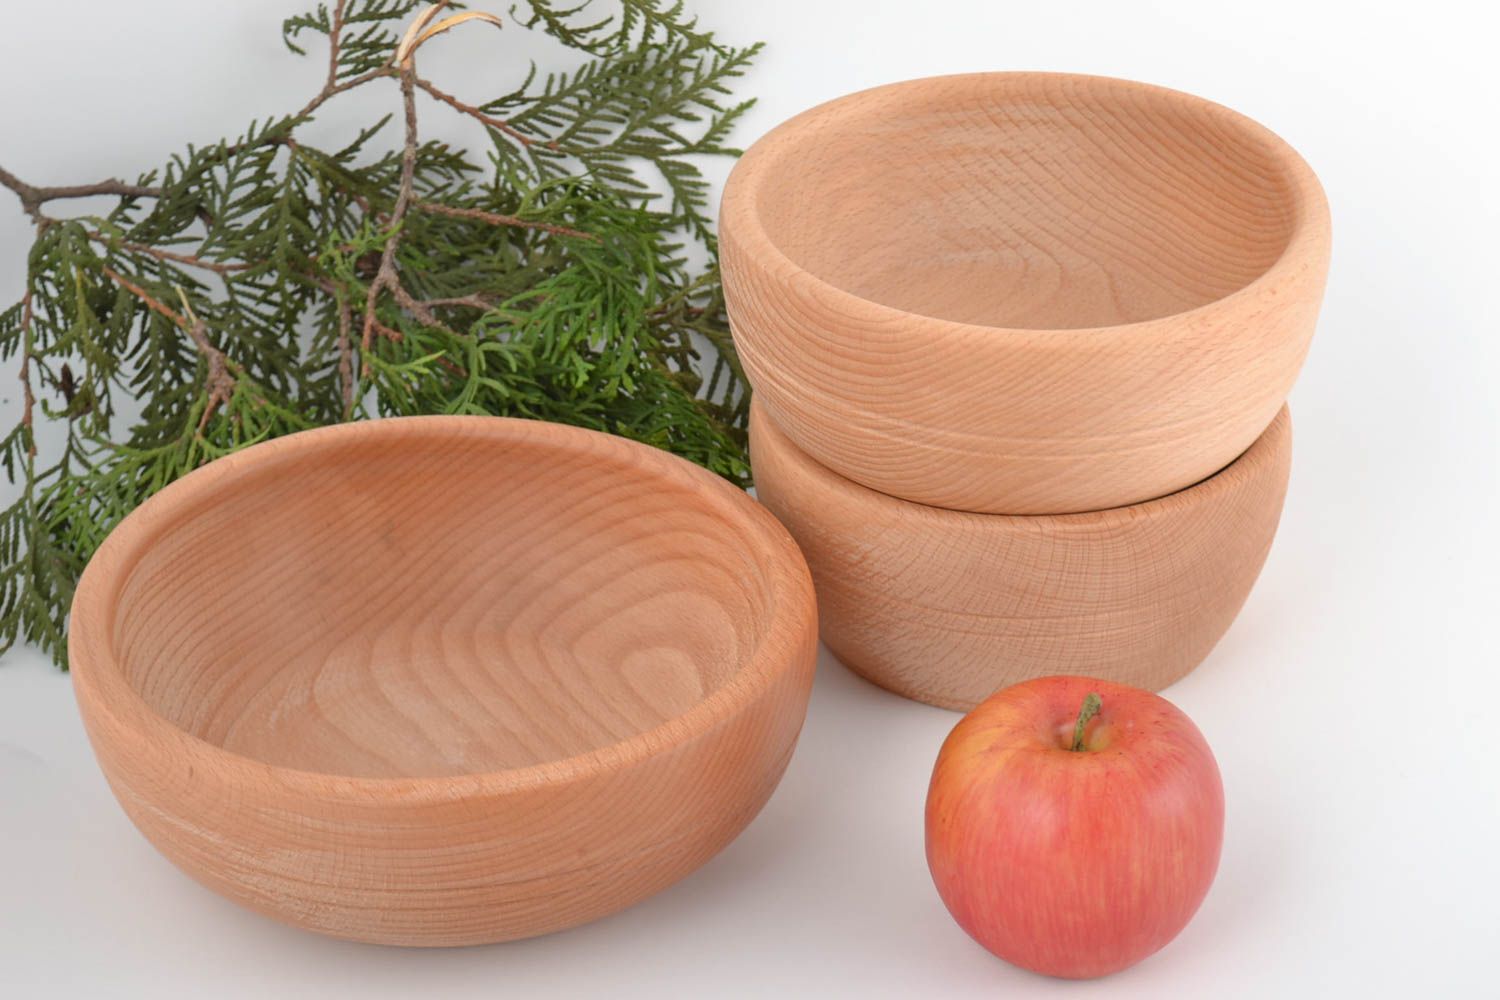 Set of 3 handmade eco friendly natural wooden food bowls of different sizes photo 1